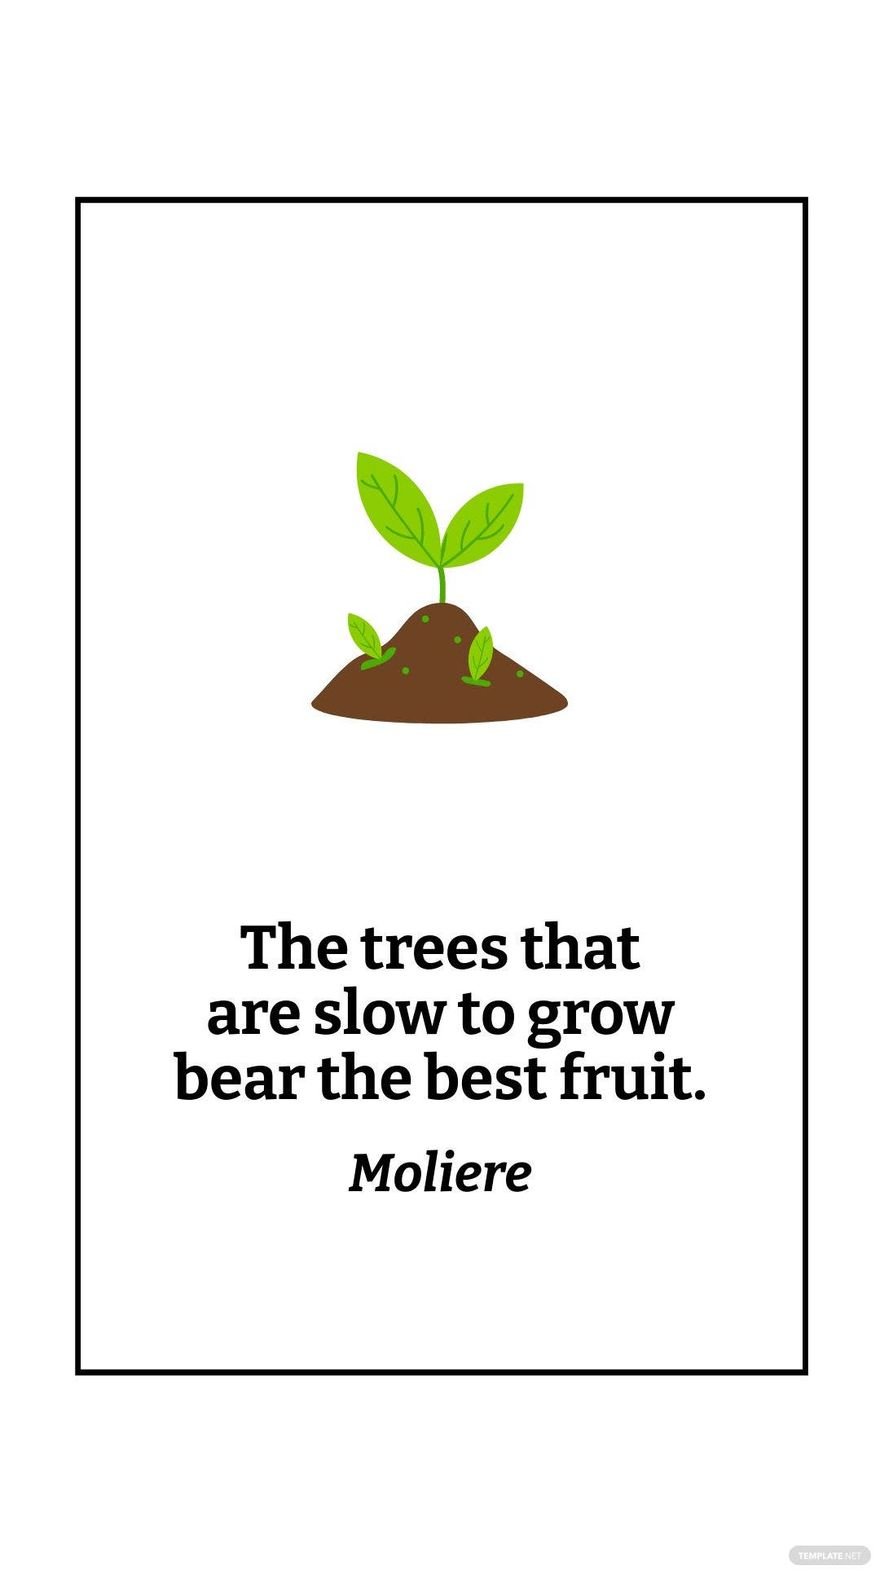 Free Moliere - The trees that are slow to grow bear the best fruit. in JPG